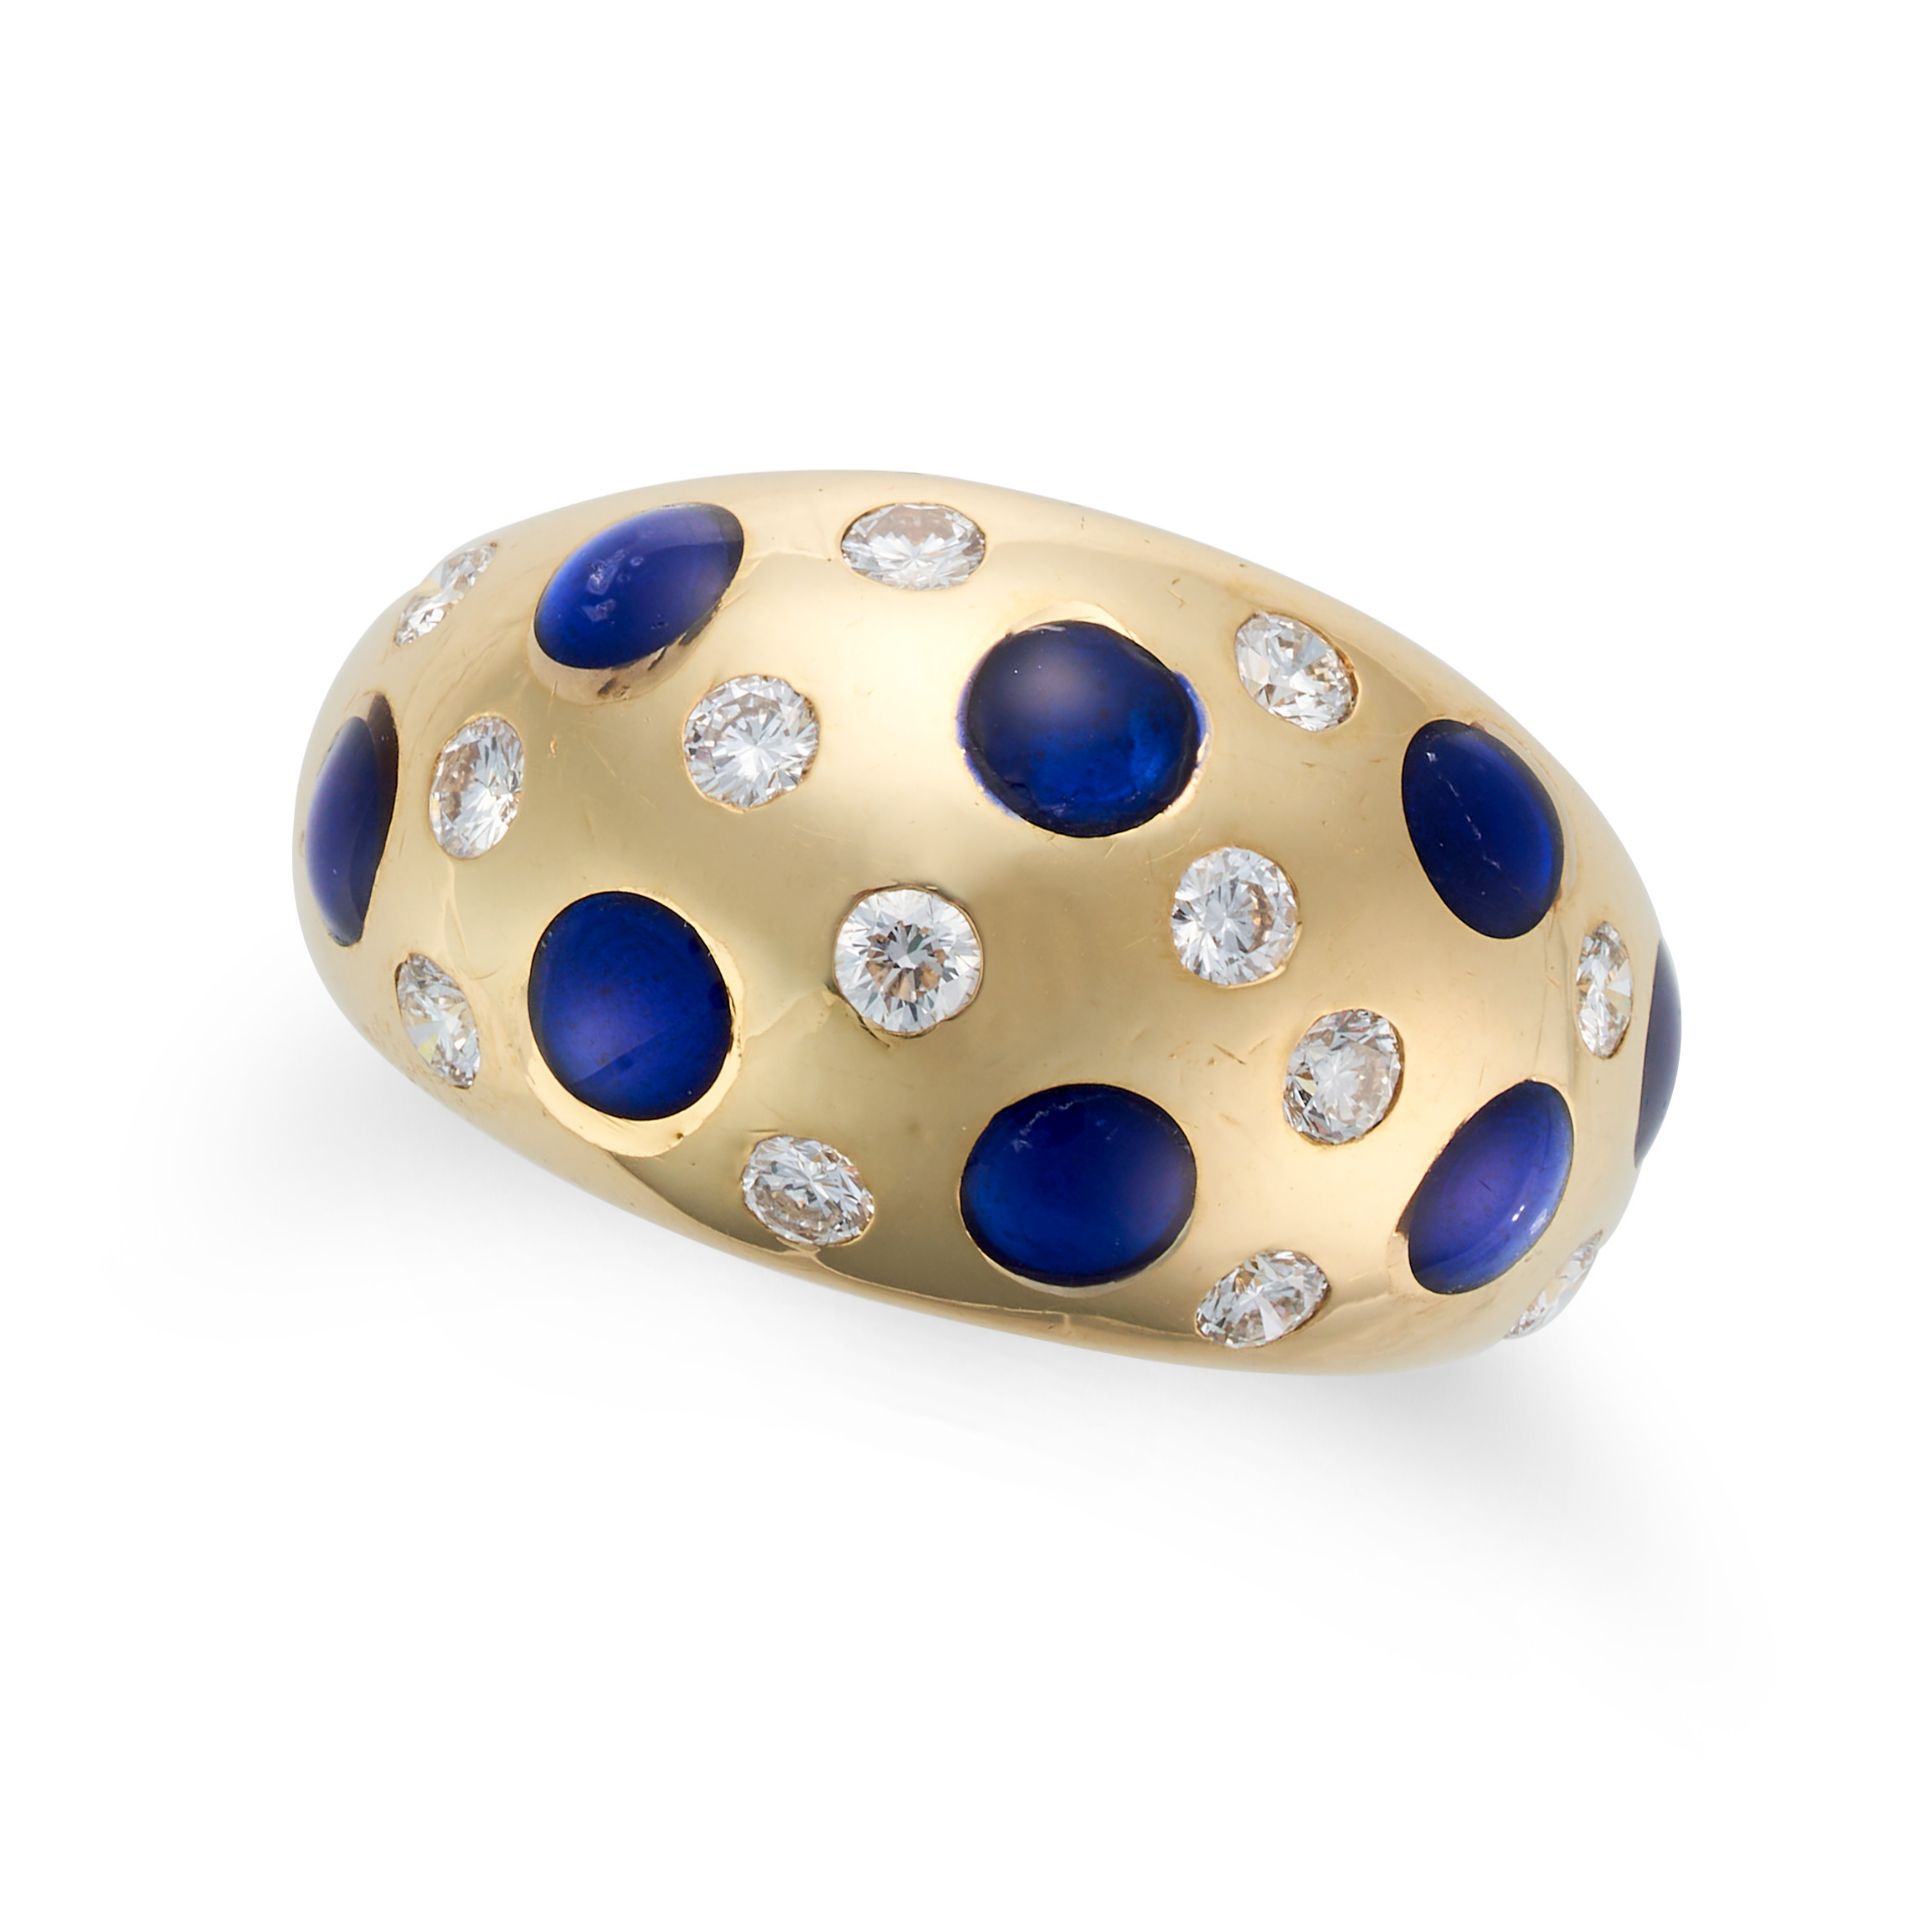 VAN CLEEF & ARPELS, A DIAMOND AND ENAMEL RING AND EARRINGS SUITE the bombe ring set with round br... - Image 3 of 4